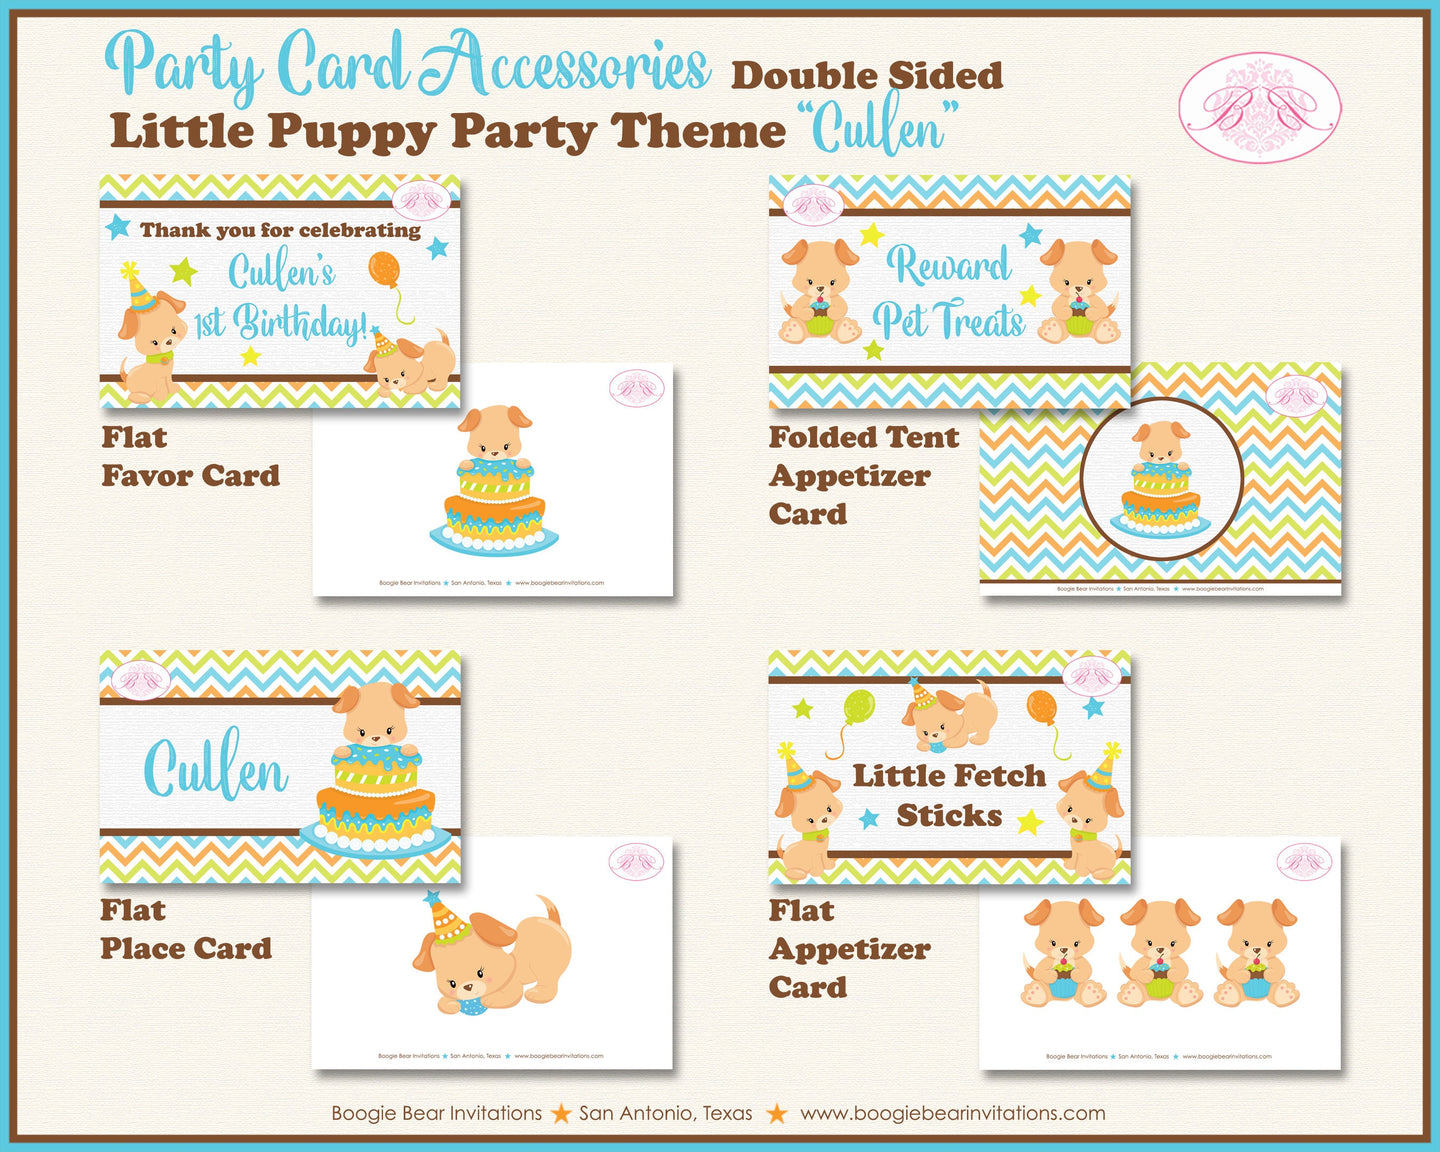 Little Puppy Birthday Favor Party Card Appetizer Food Place Sign Label Dog Pet Paw Pawty Adoption Blue Boogie Bear Invitations Cullen Theme